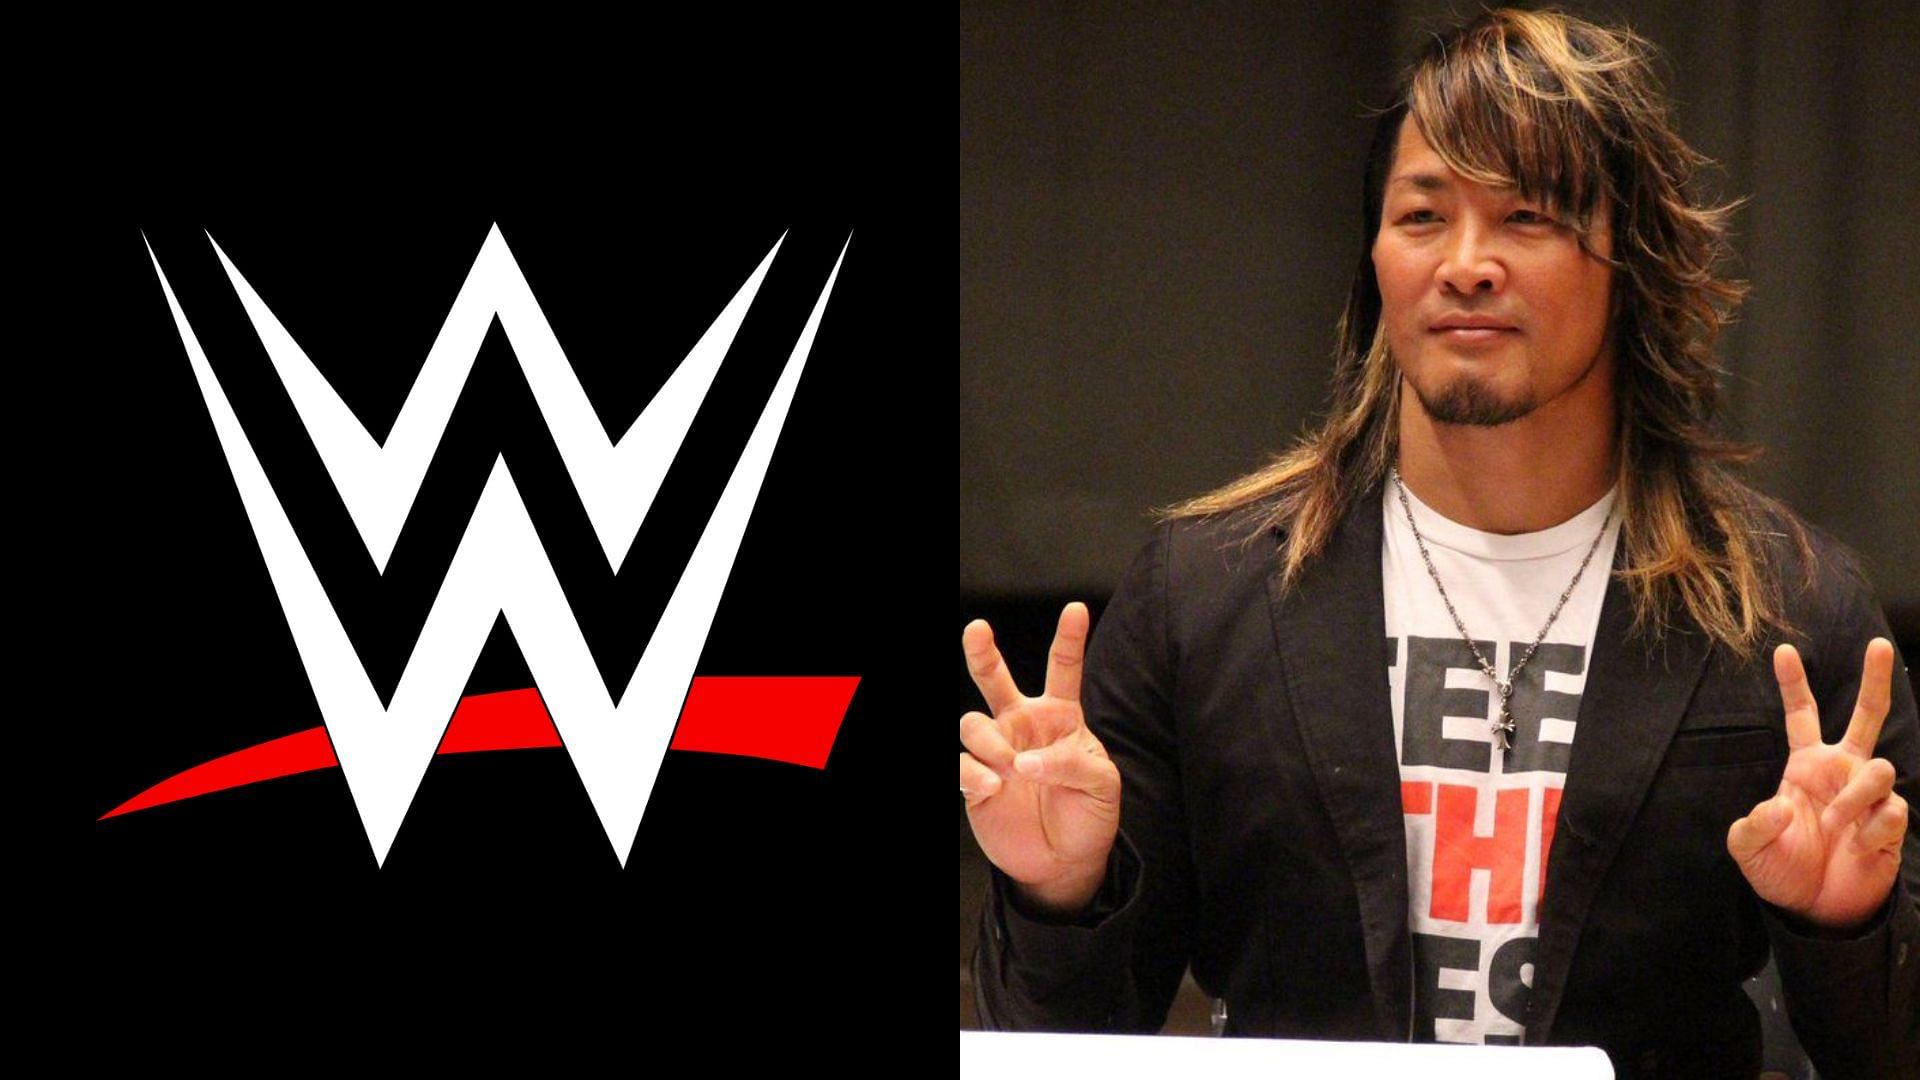 In what ways did this pro wrestling legend inspire Hiroshi Tanahashi?